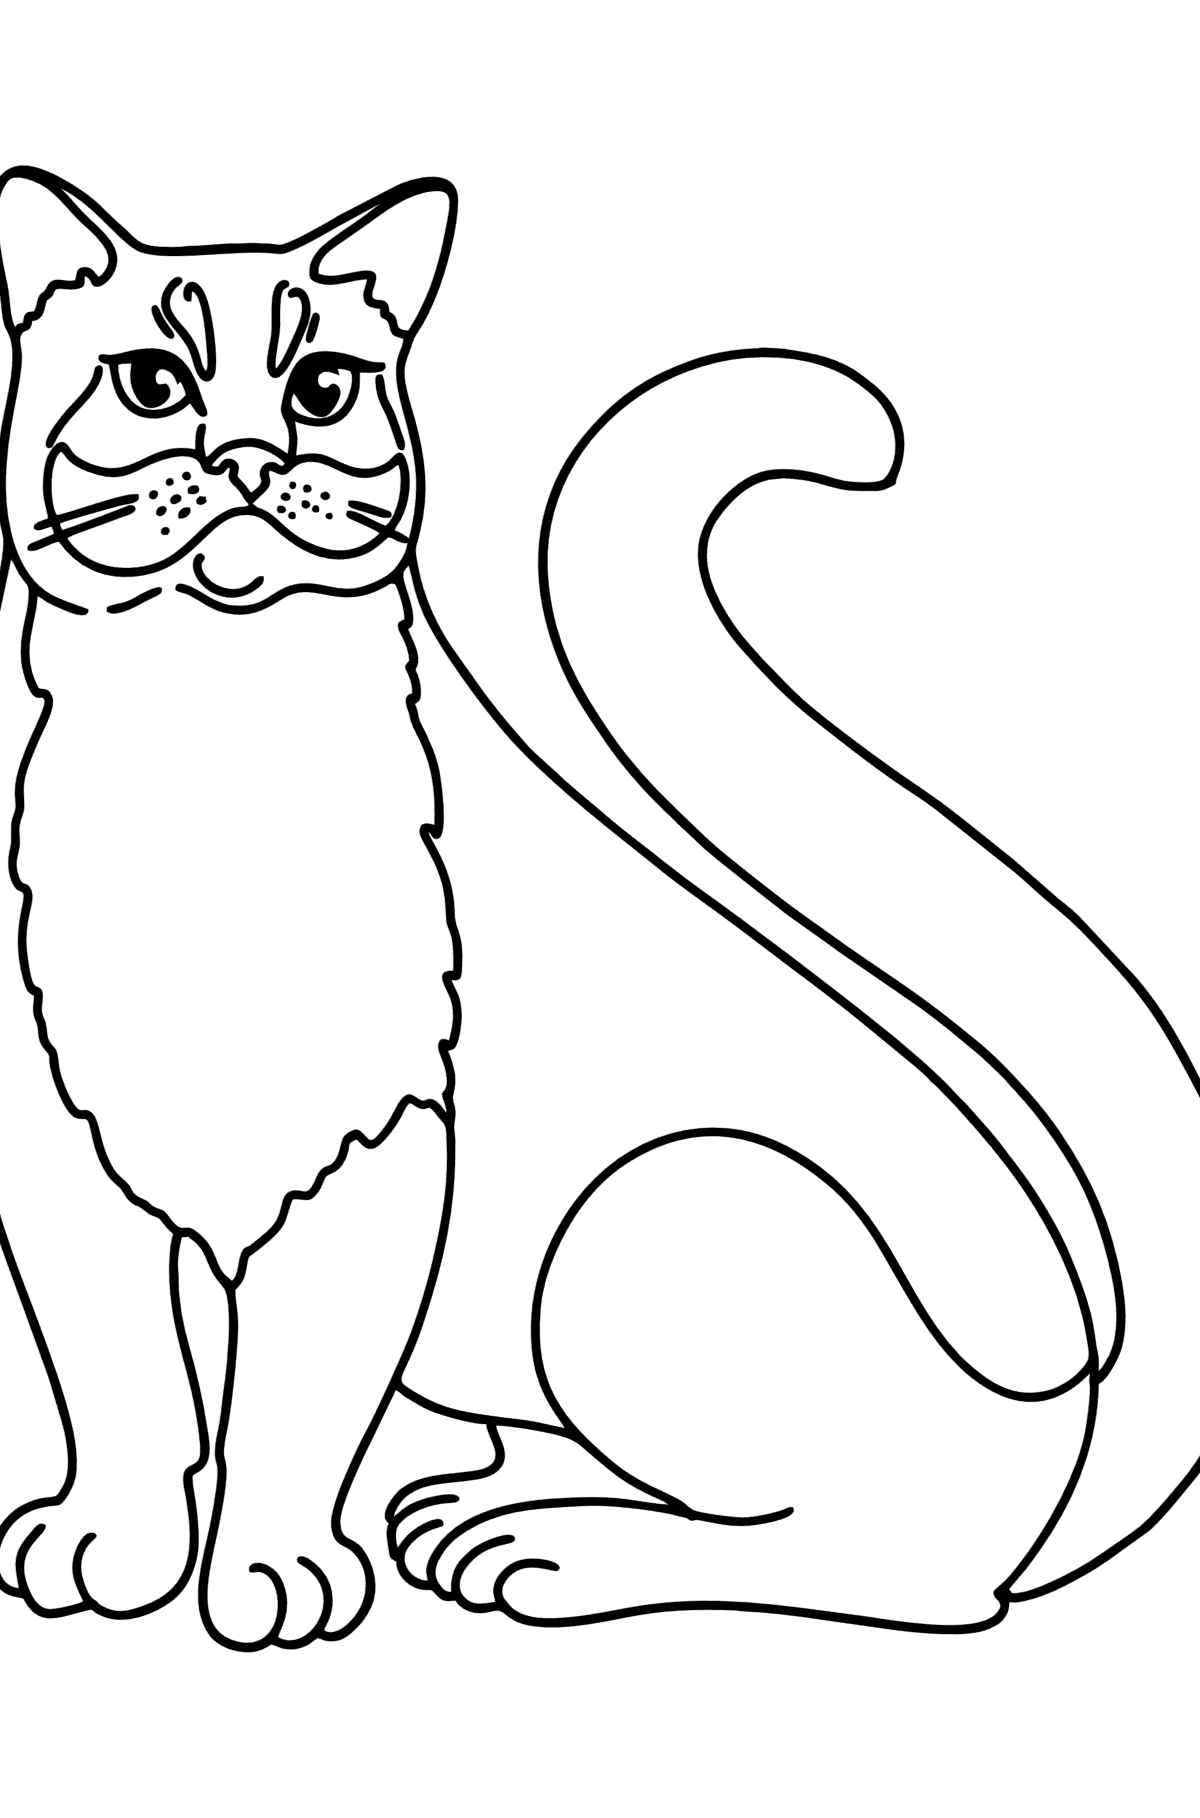 Russian Blue Cat coloring page - Coloring Pages for Kids